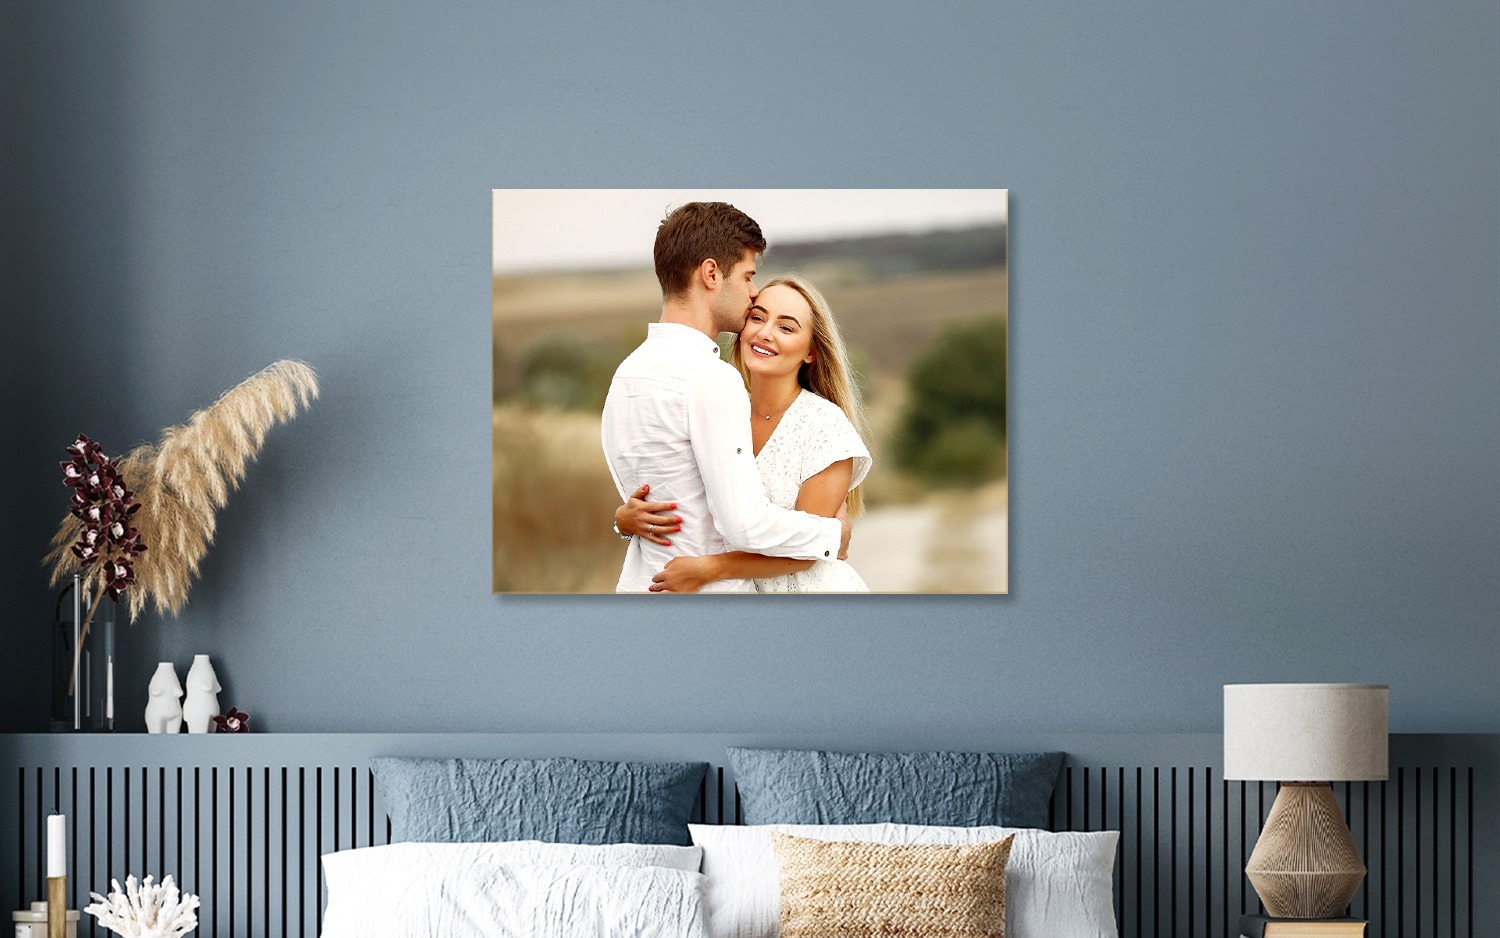 BOGO 37"x25" or 24"x37" Canvas Print, 2 from $45.80 + Free Shipping $46.75